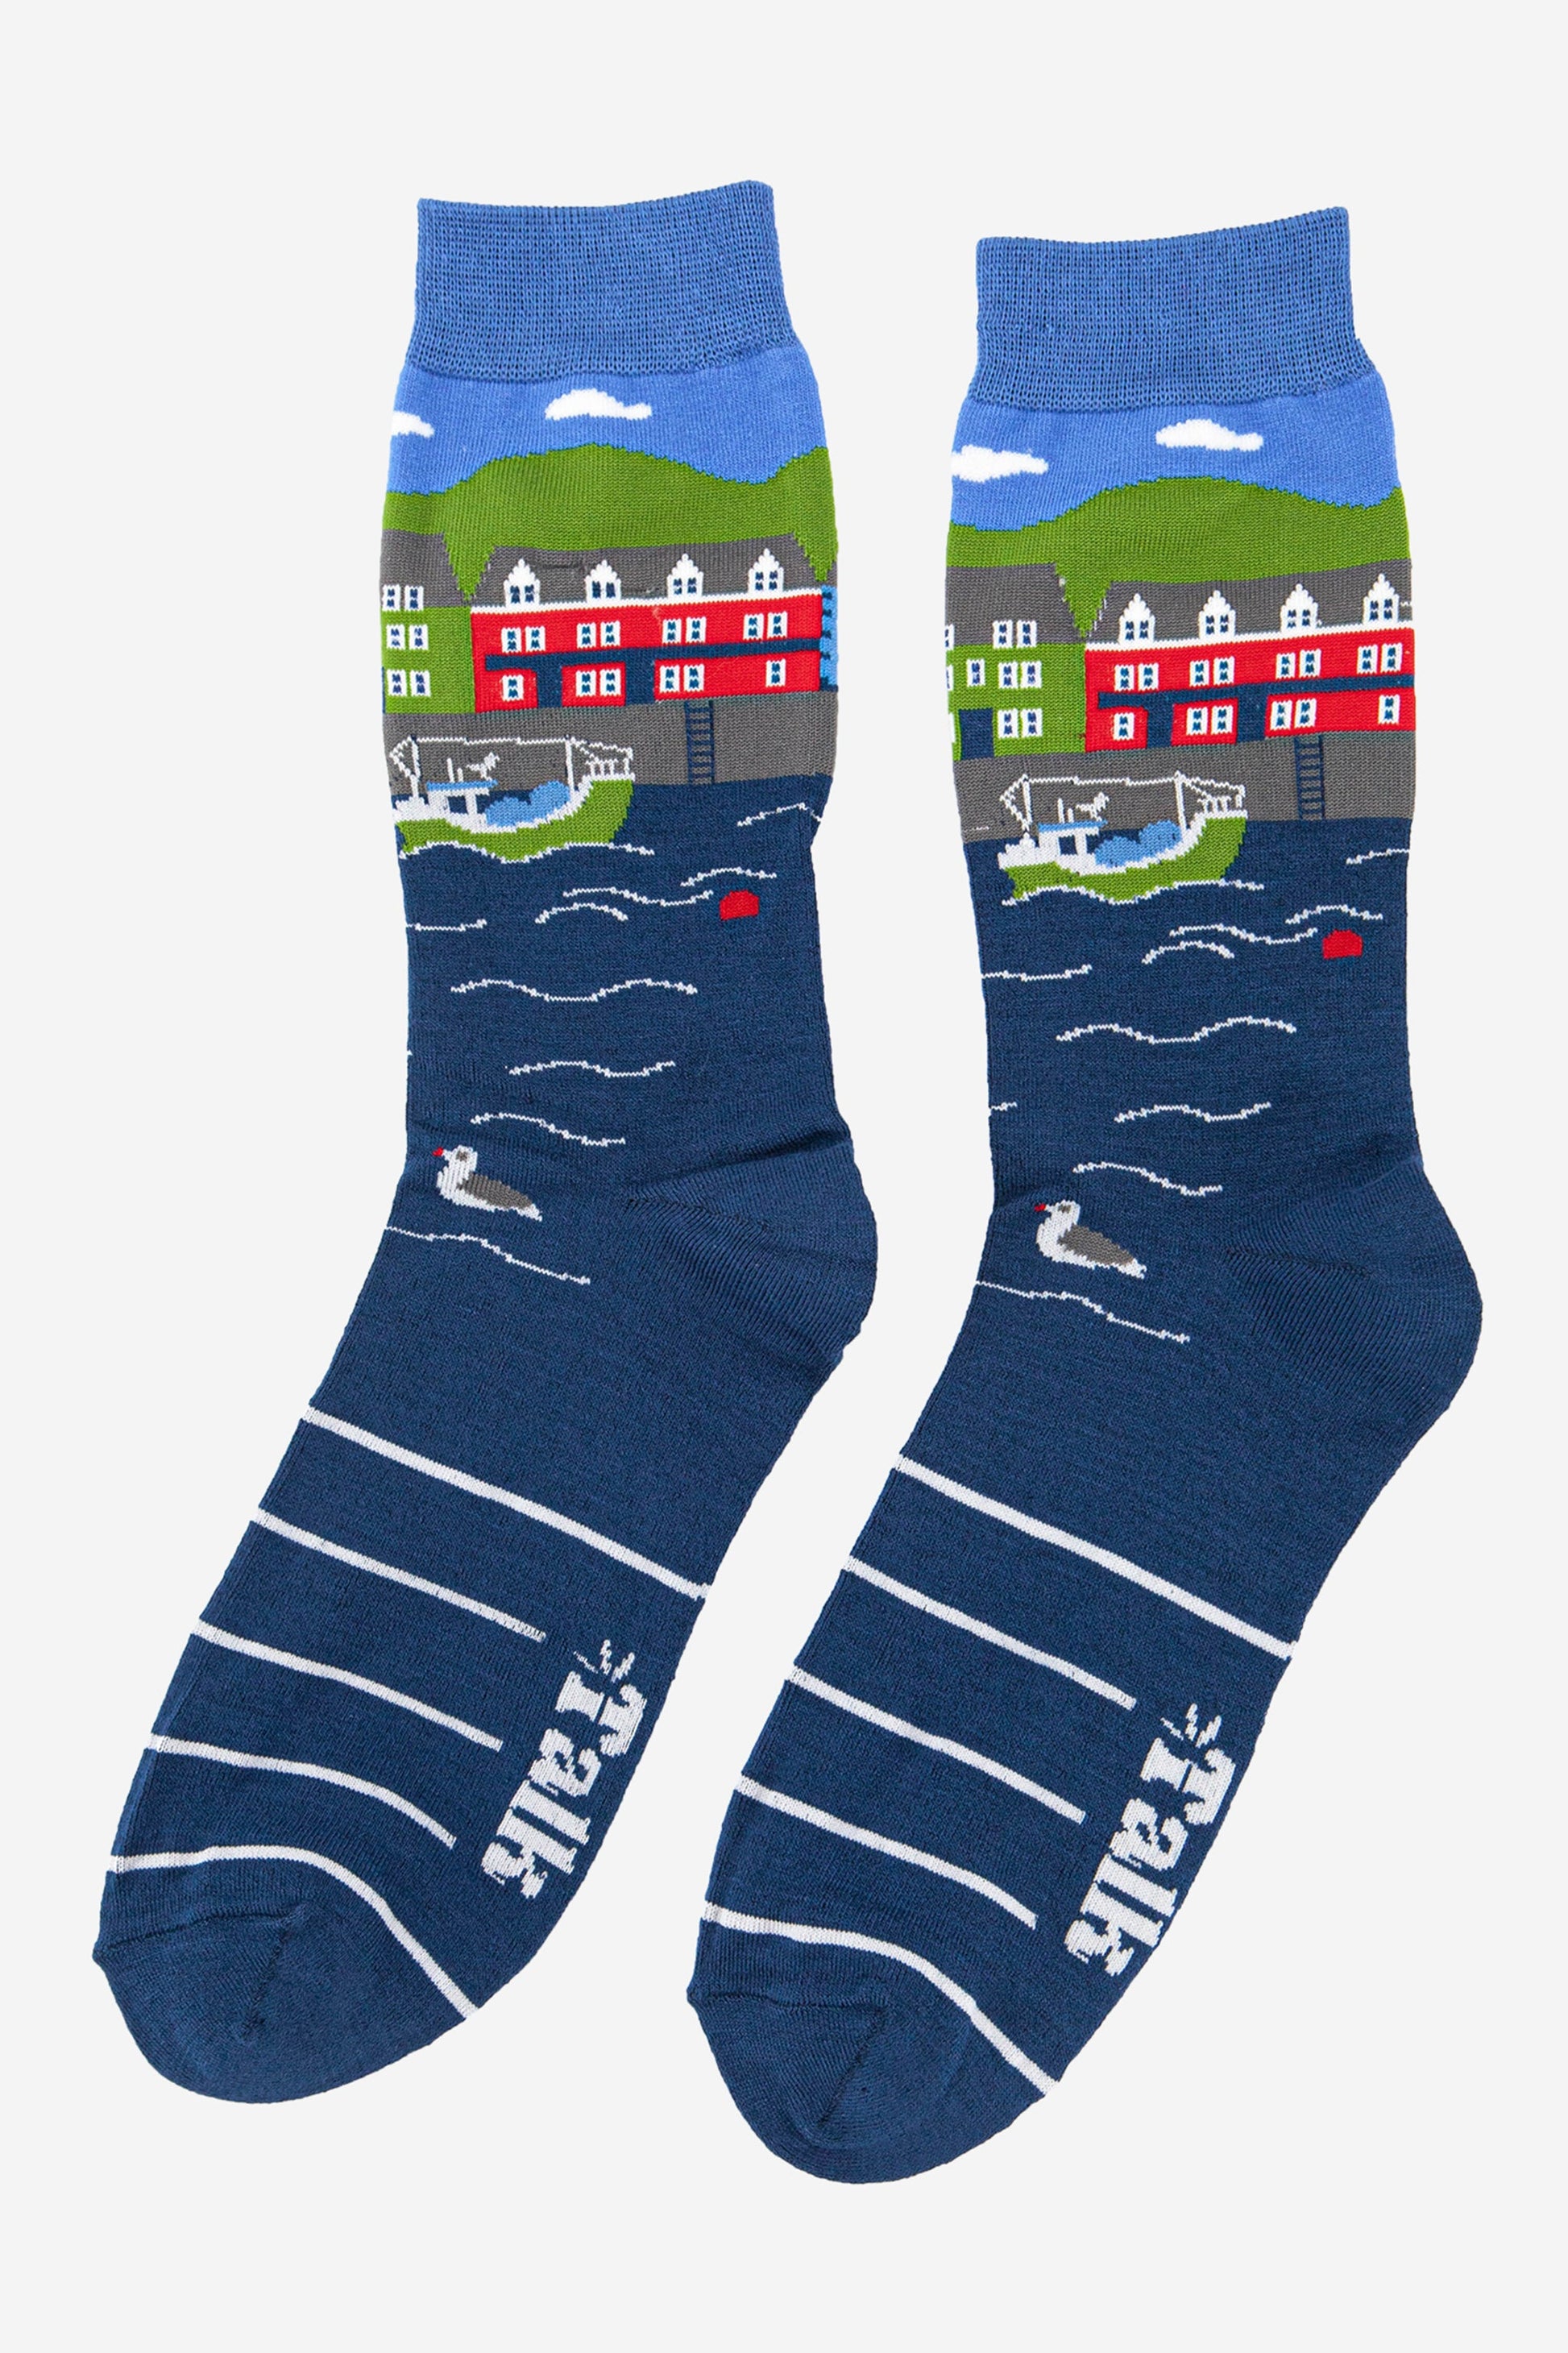 mens fishing village scene bamboo socks in blue, green and red, featuring a harbour setting with a fishing boat and seagulls